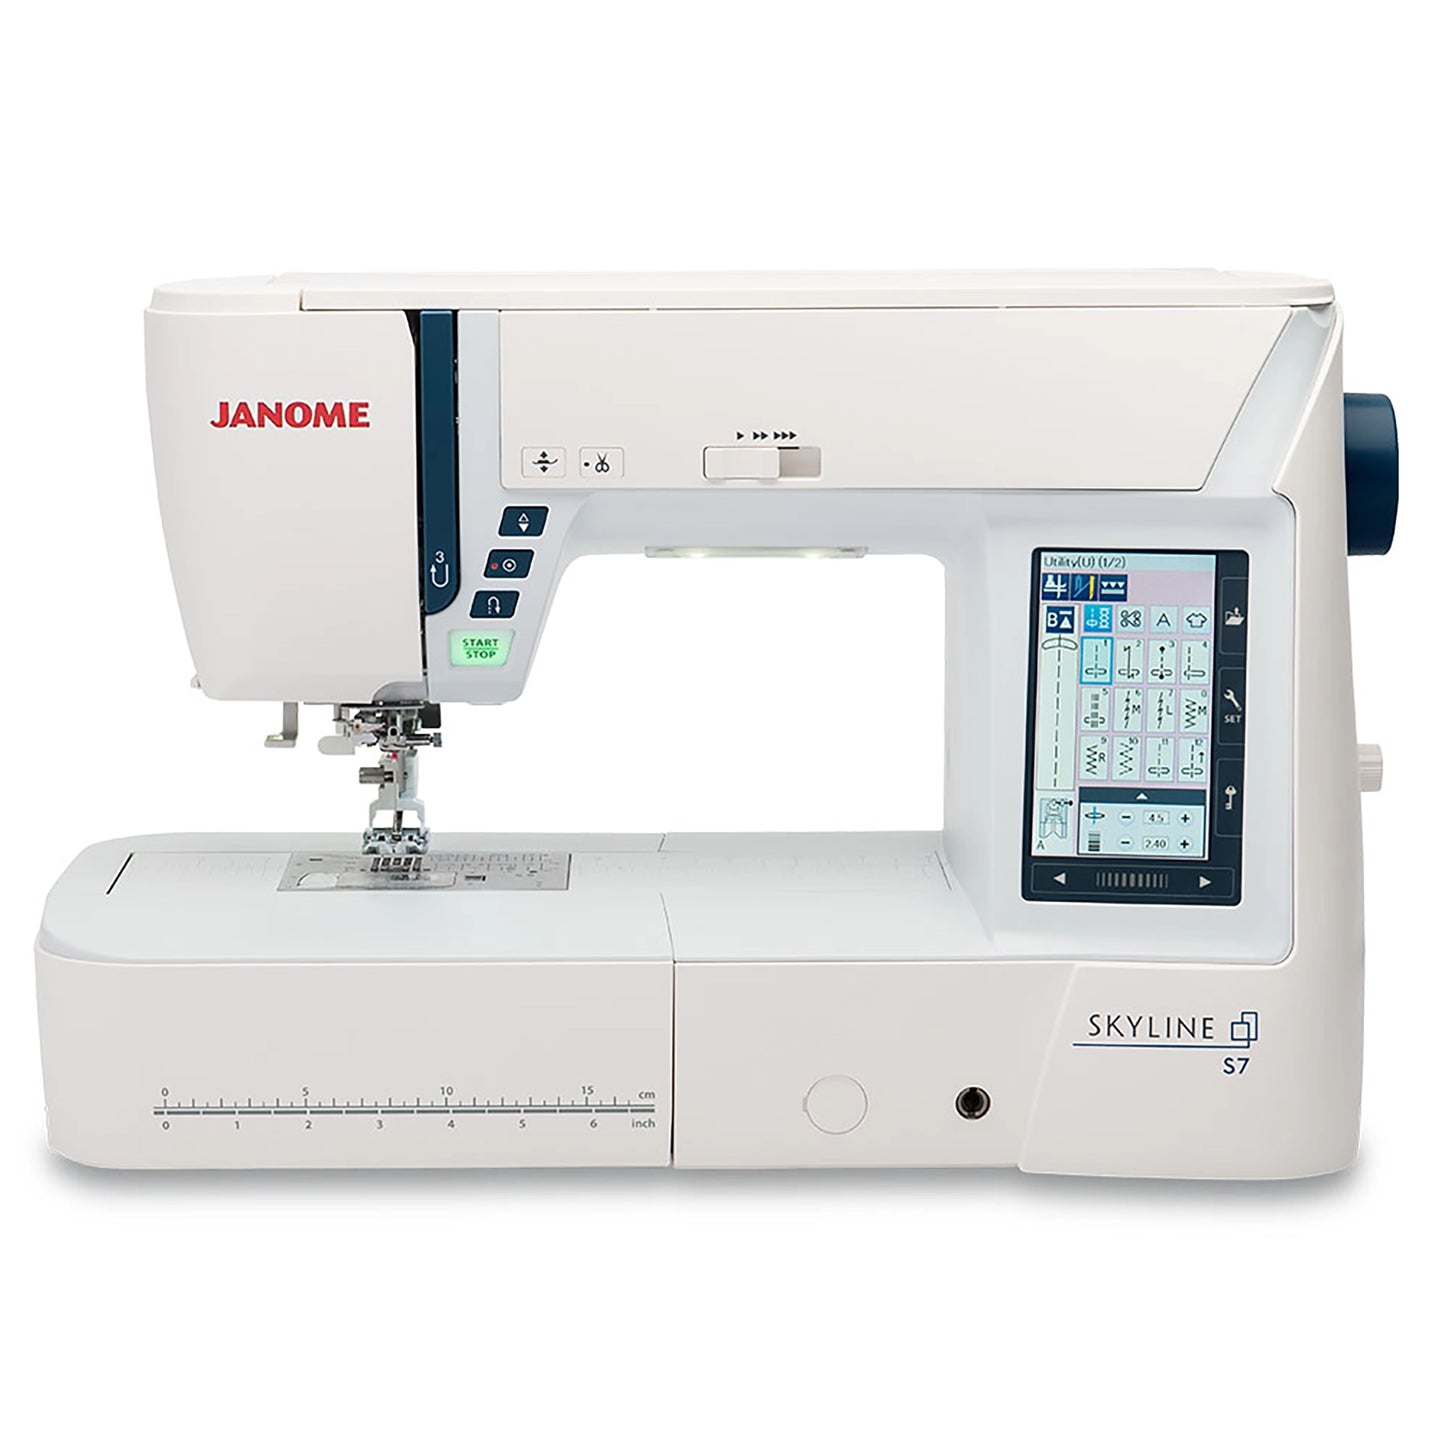 Janome Skyline S7 Sewing & Quilting Machine